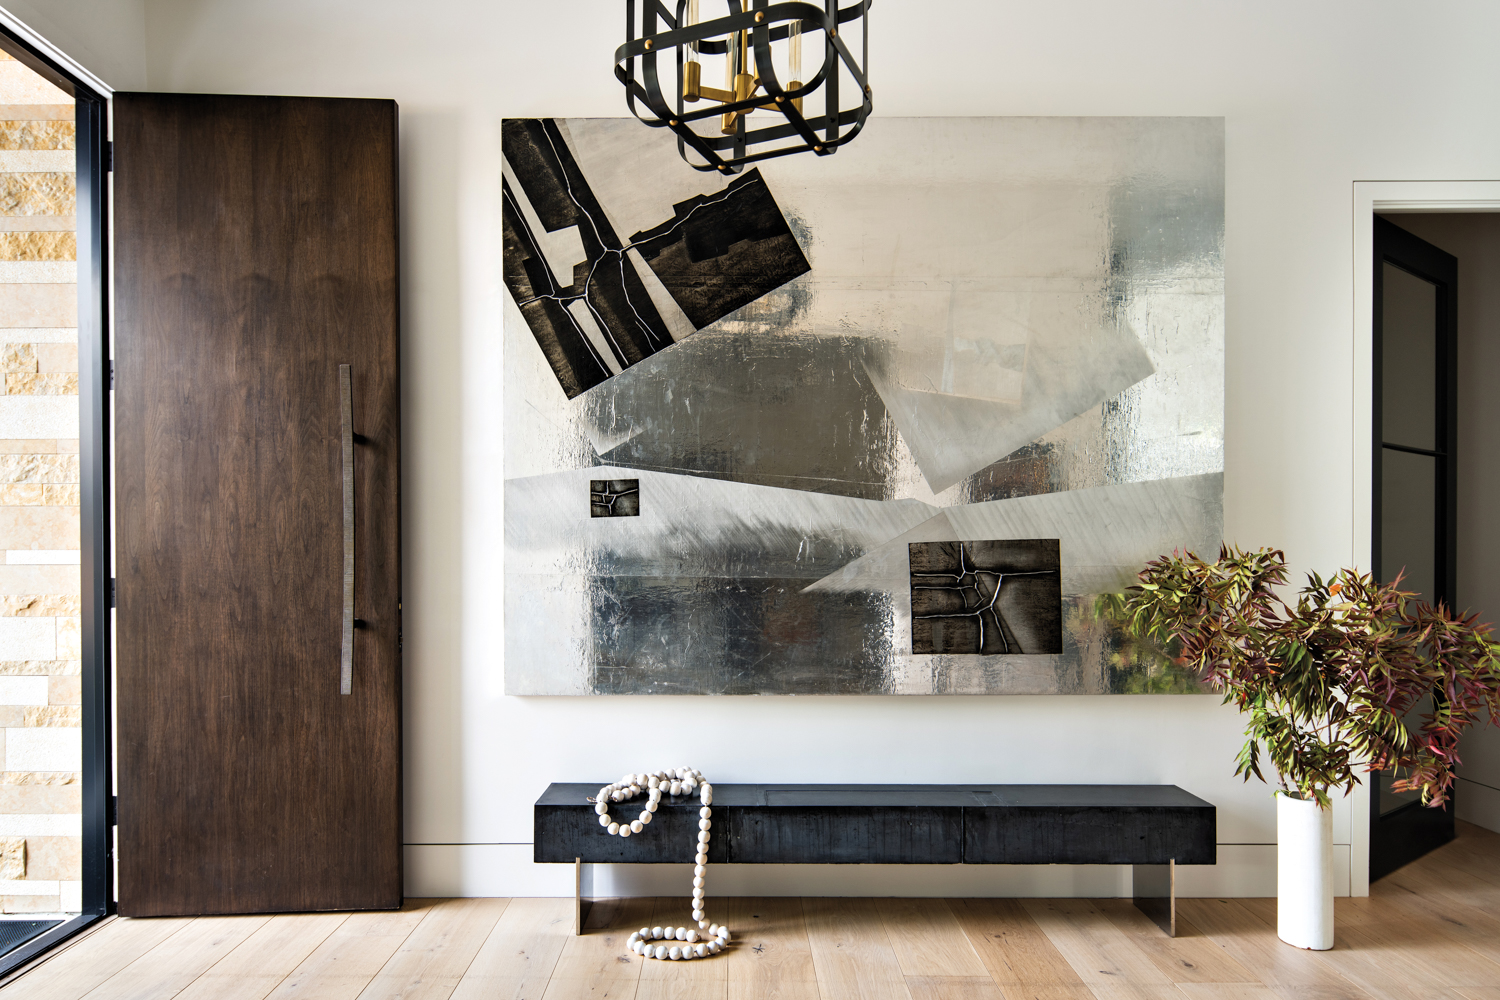 Large art in an entryway